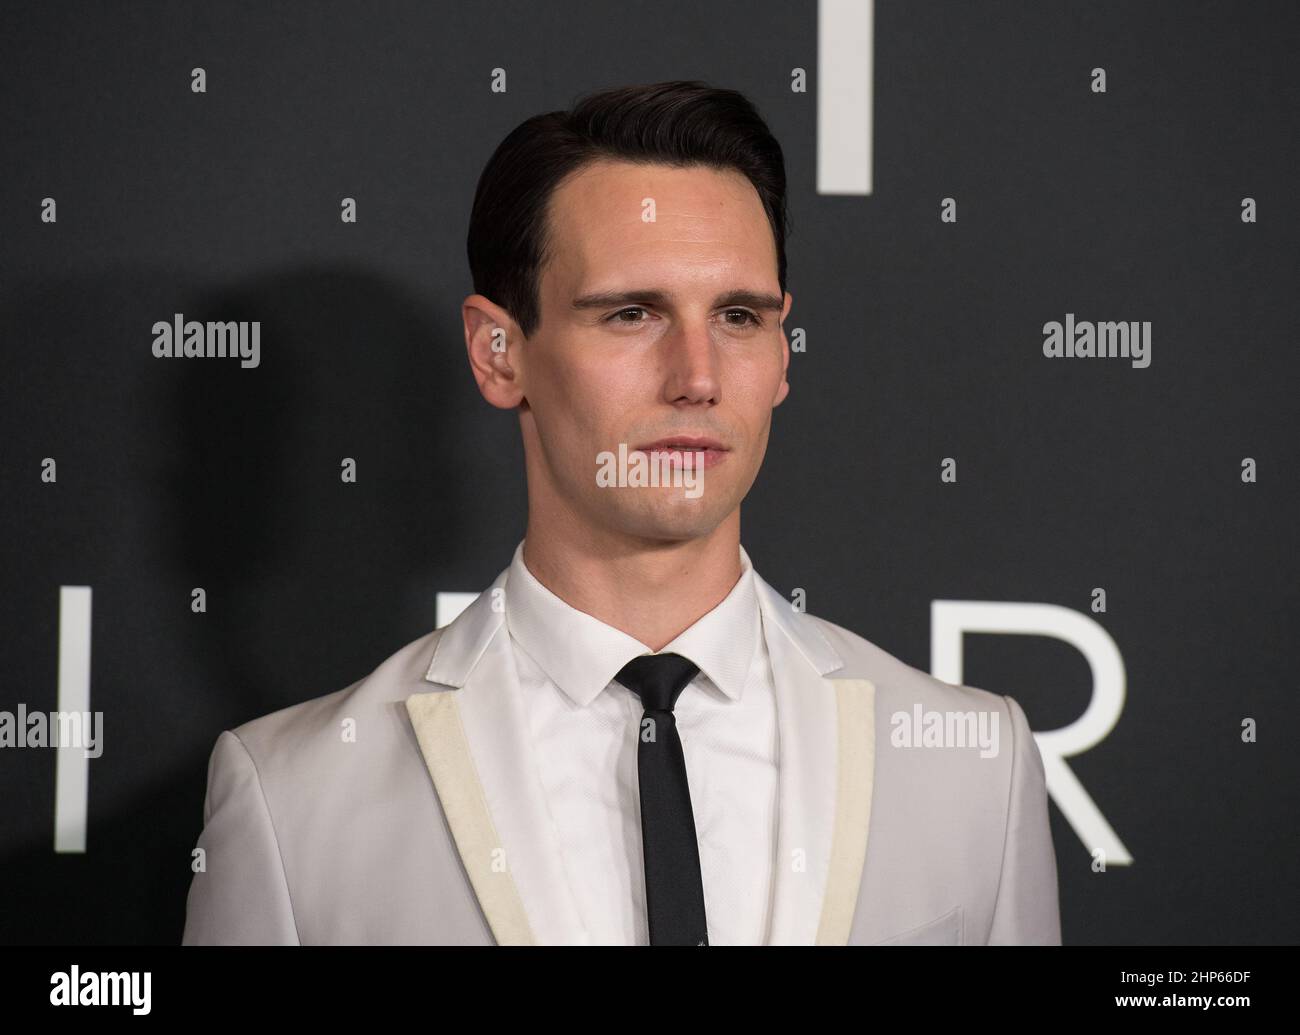 American actor Cory Michael Smith arrives on the red carpet for the premiere of the film 'First Man' at the Smithsonian National Air and Space Museum Thursday, Oct. 4, 2018 in Washington. The film is based on the book by Jim Hansen, and chronicles the life of NASA astronaut Neil Armstrong from test pilot to his historic Moon landing. Photo Credit: (NASA/Aubrey Gemignani) Stock Photo